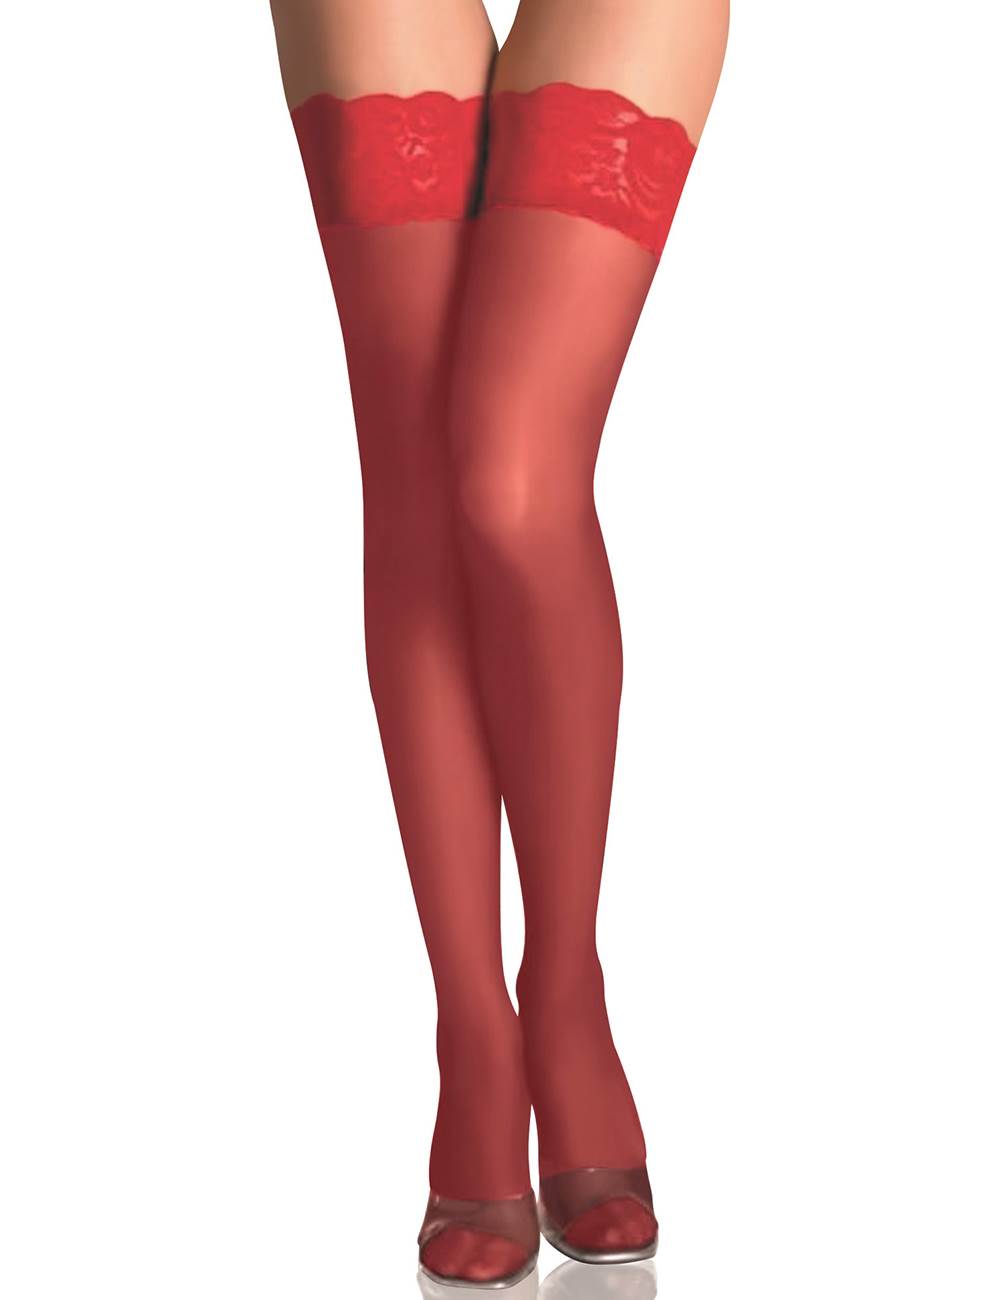 Flirty Red Lace Stockings